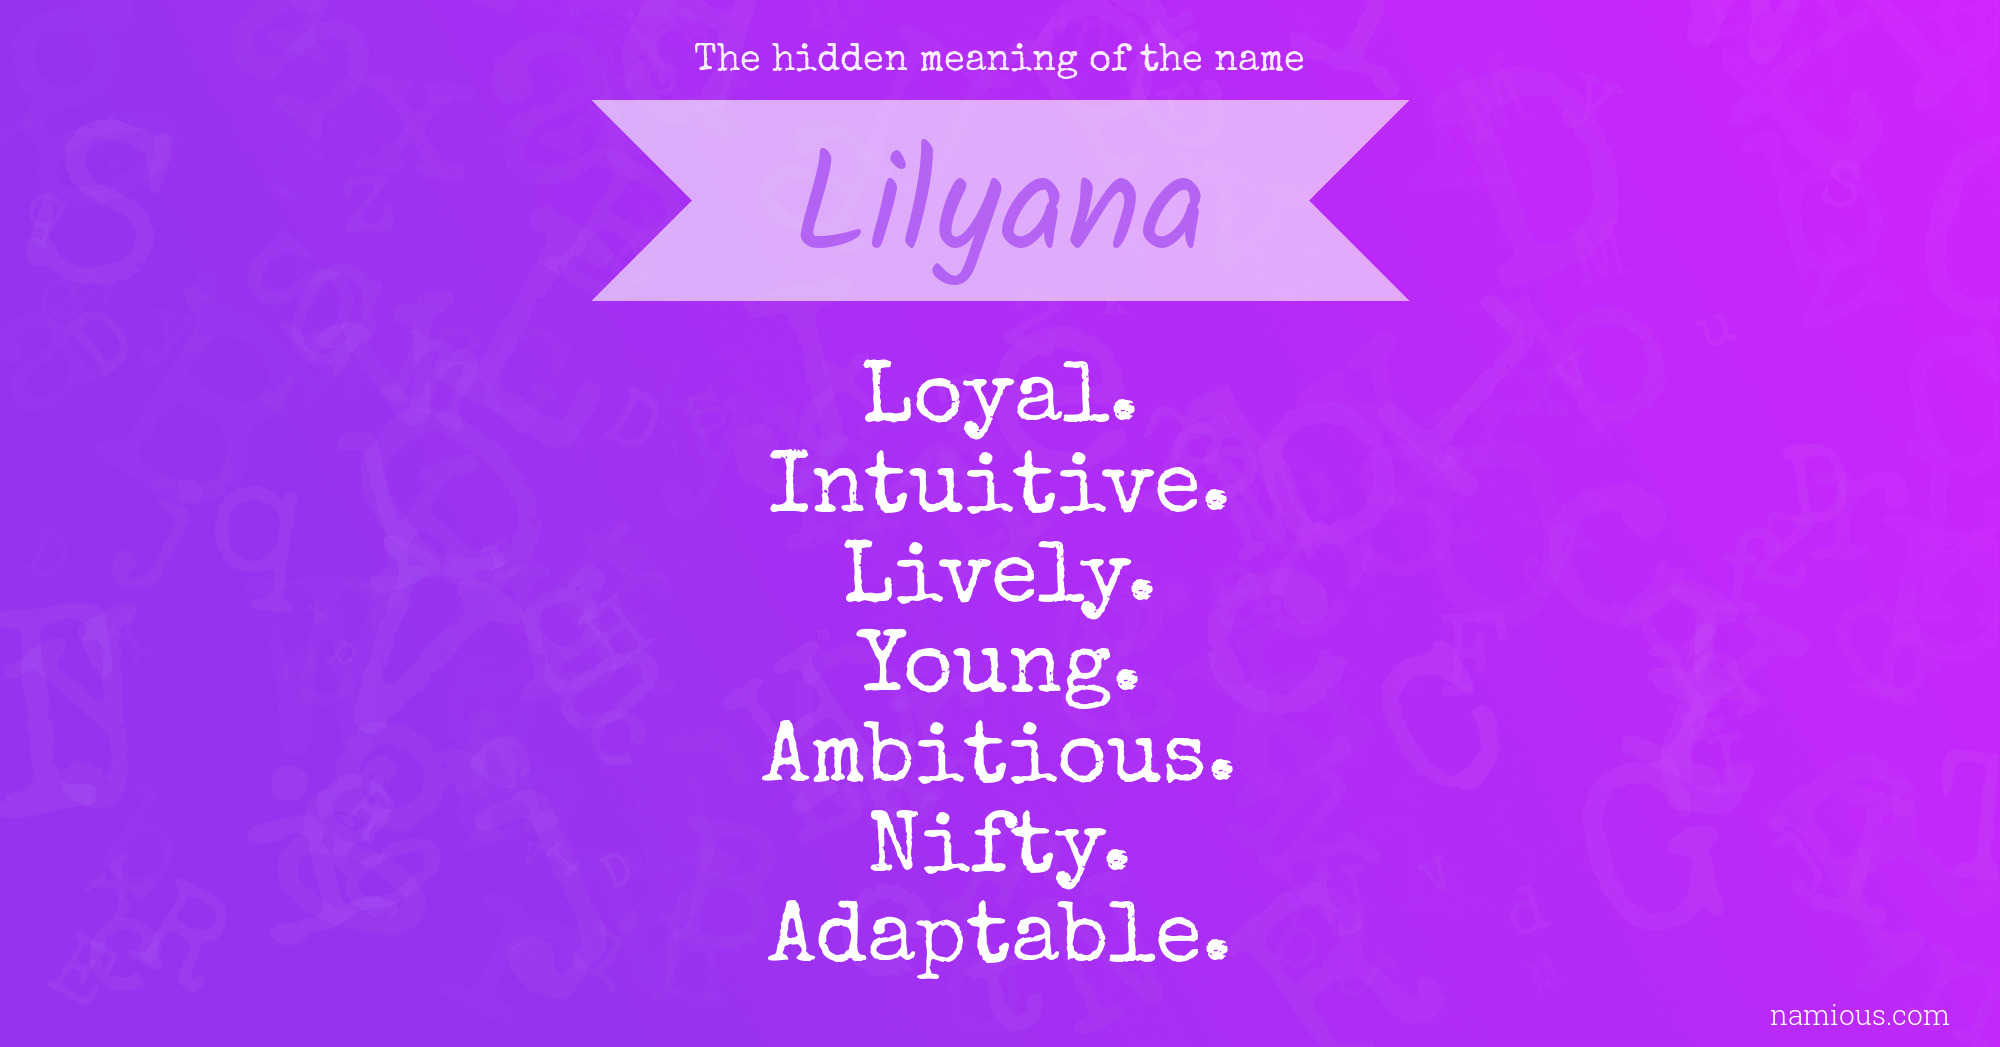 The hidden meaning of the name Lilyana